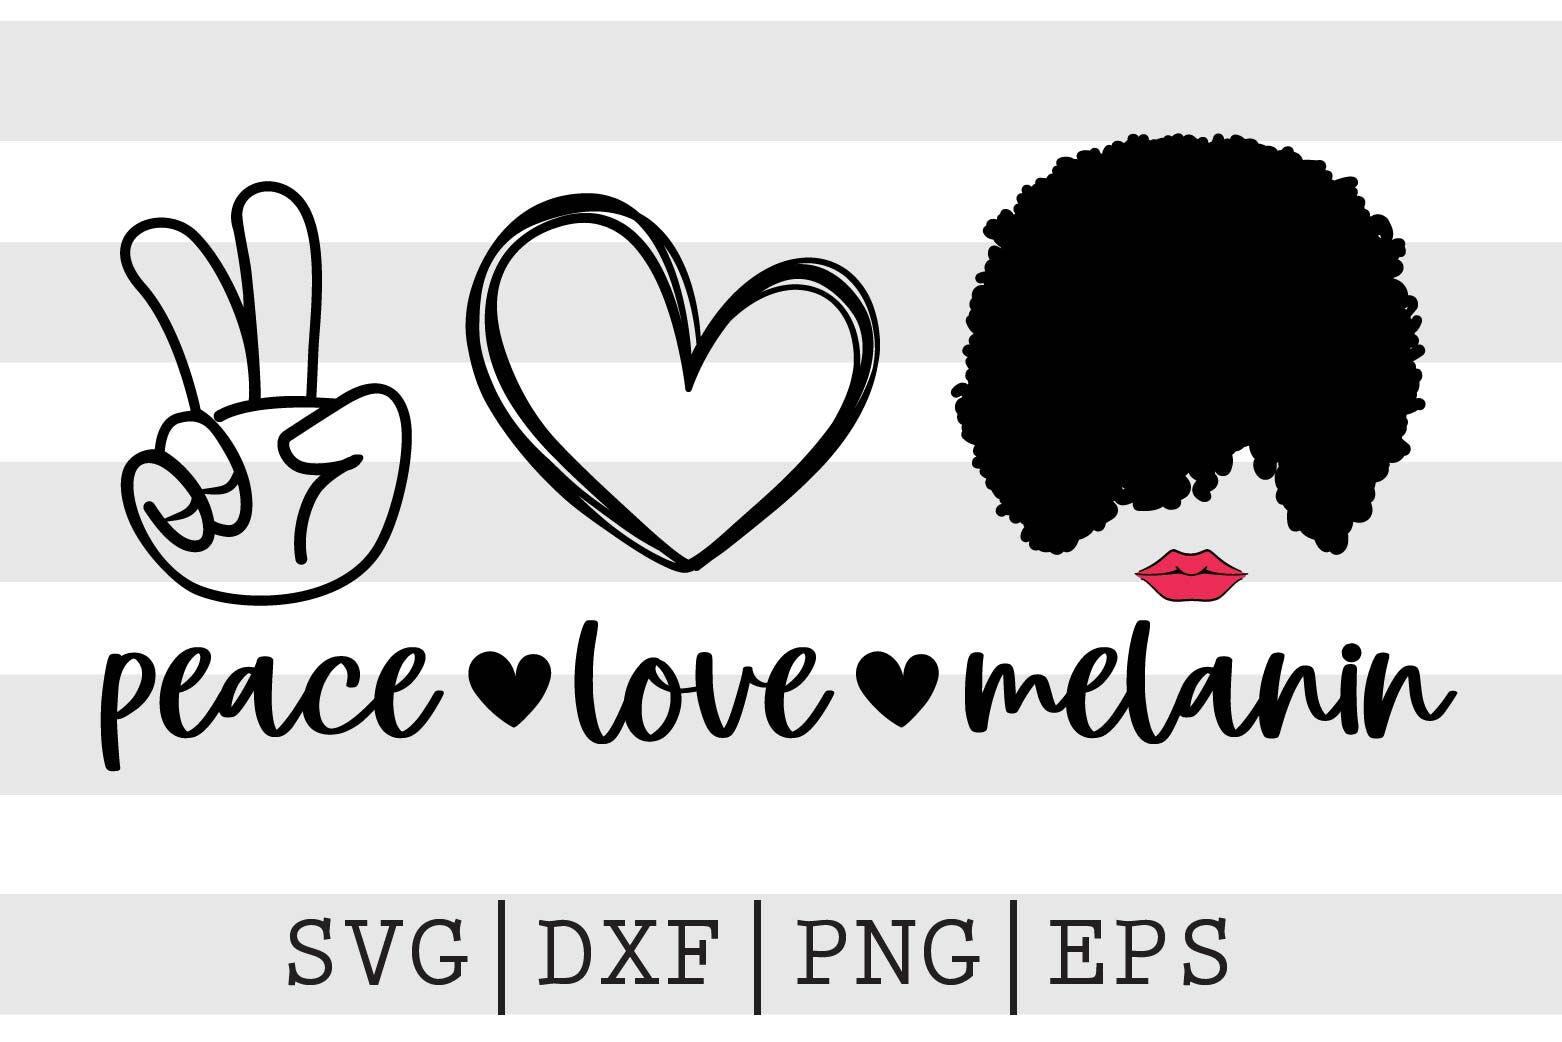 Download Peace Love Melanin Svg By Spoonyprint Thehungryjpeg Com